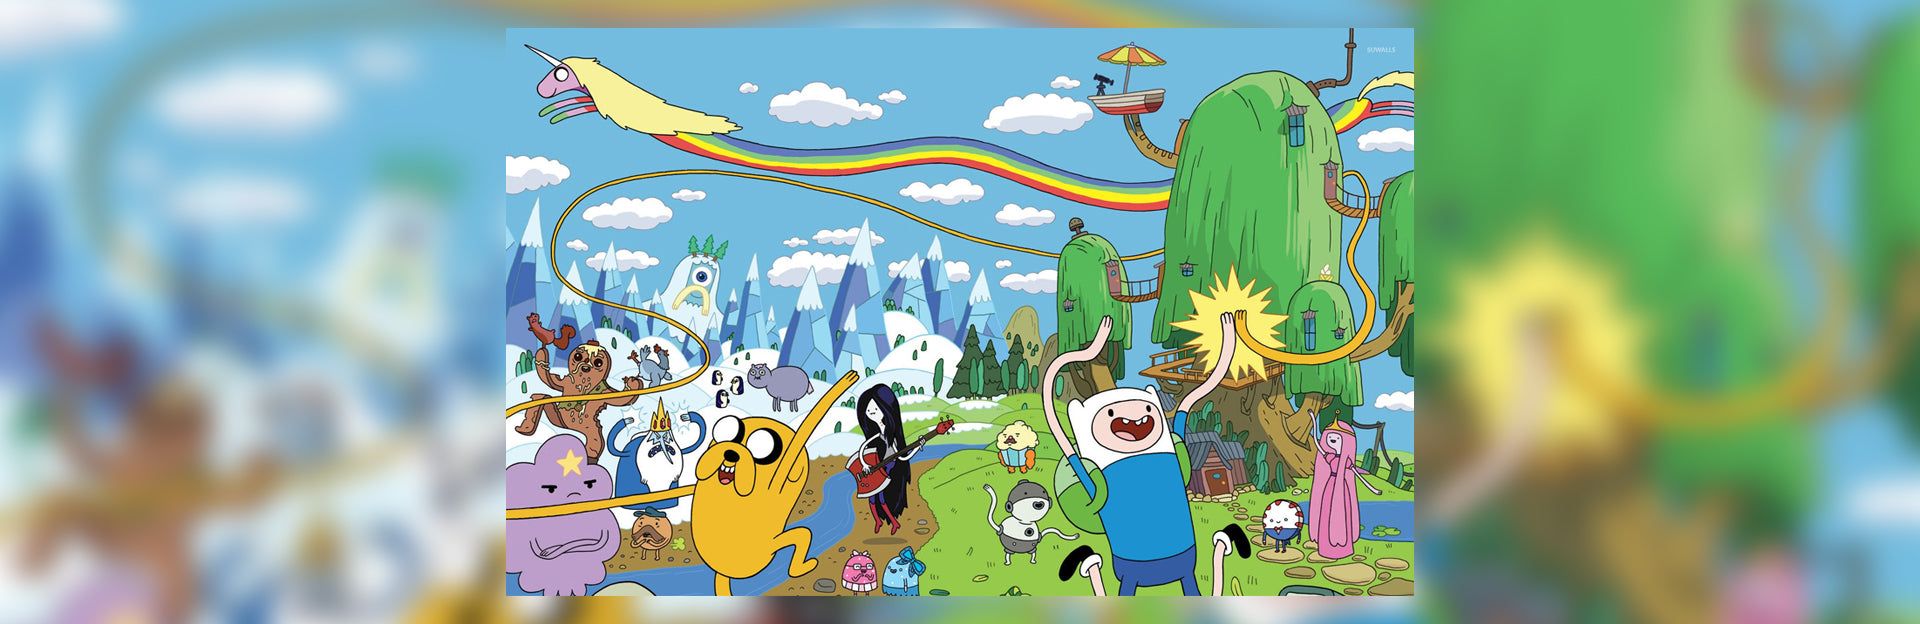 The characters from Adventure Time are seen on a colorful background. - Adventure Time